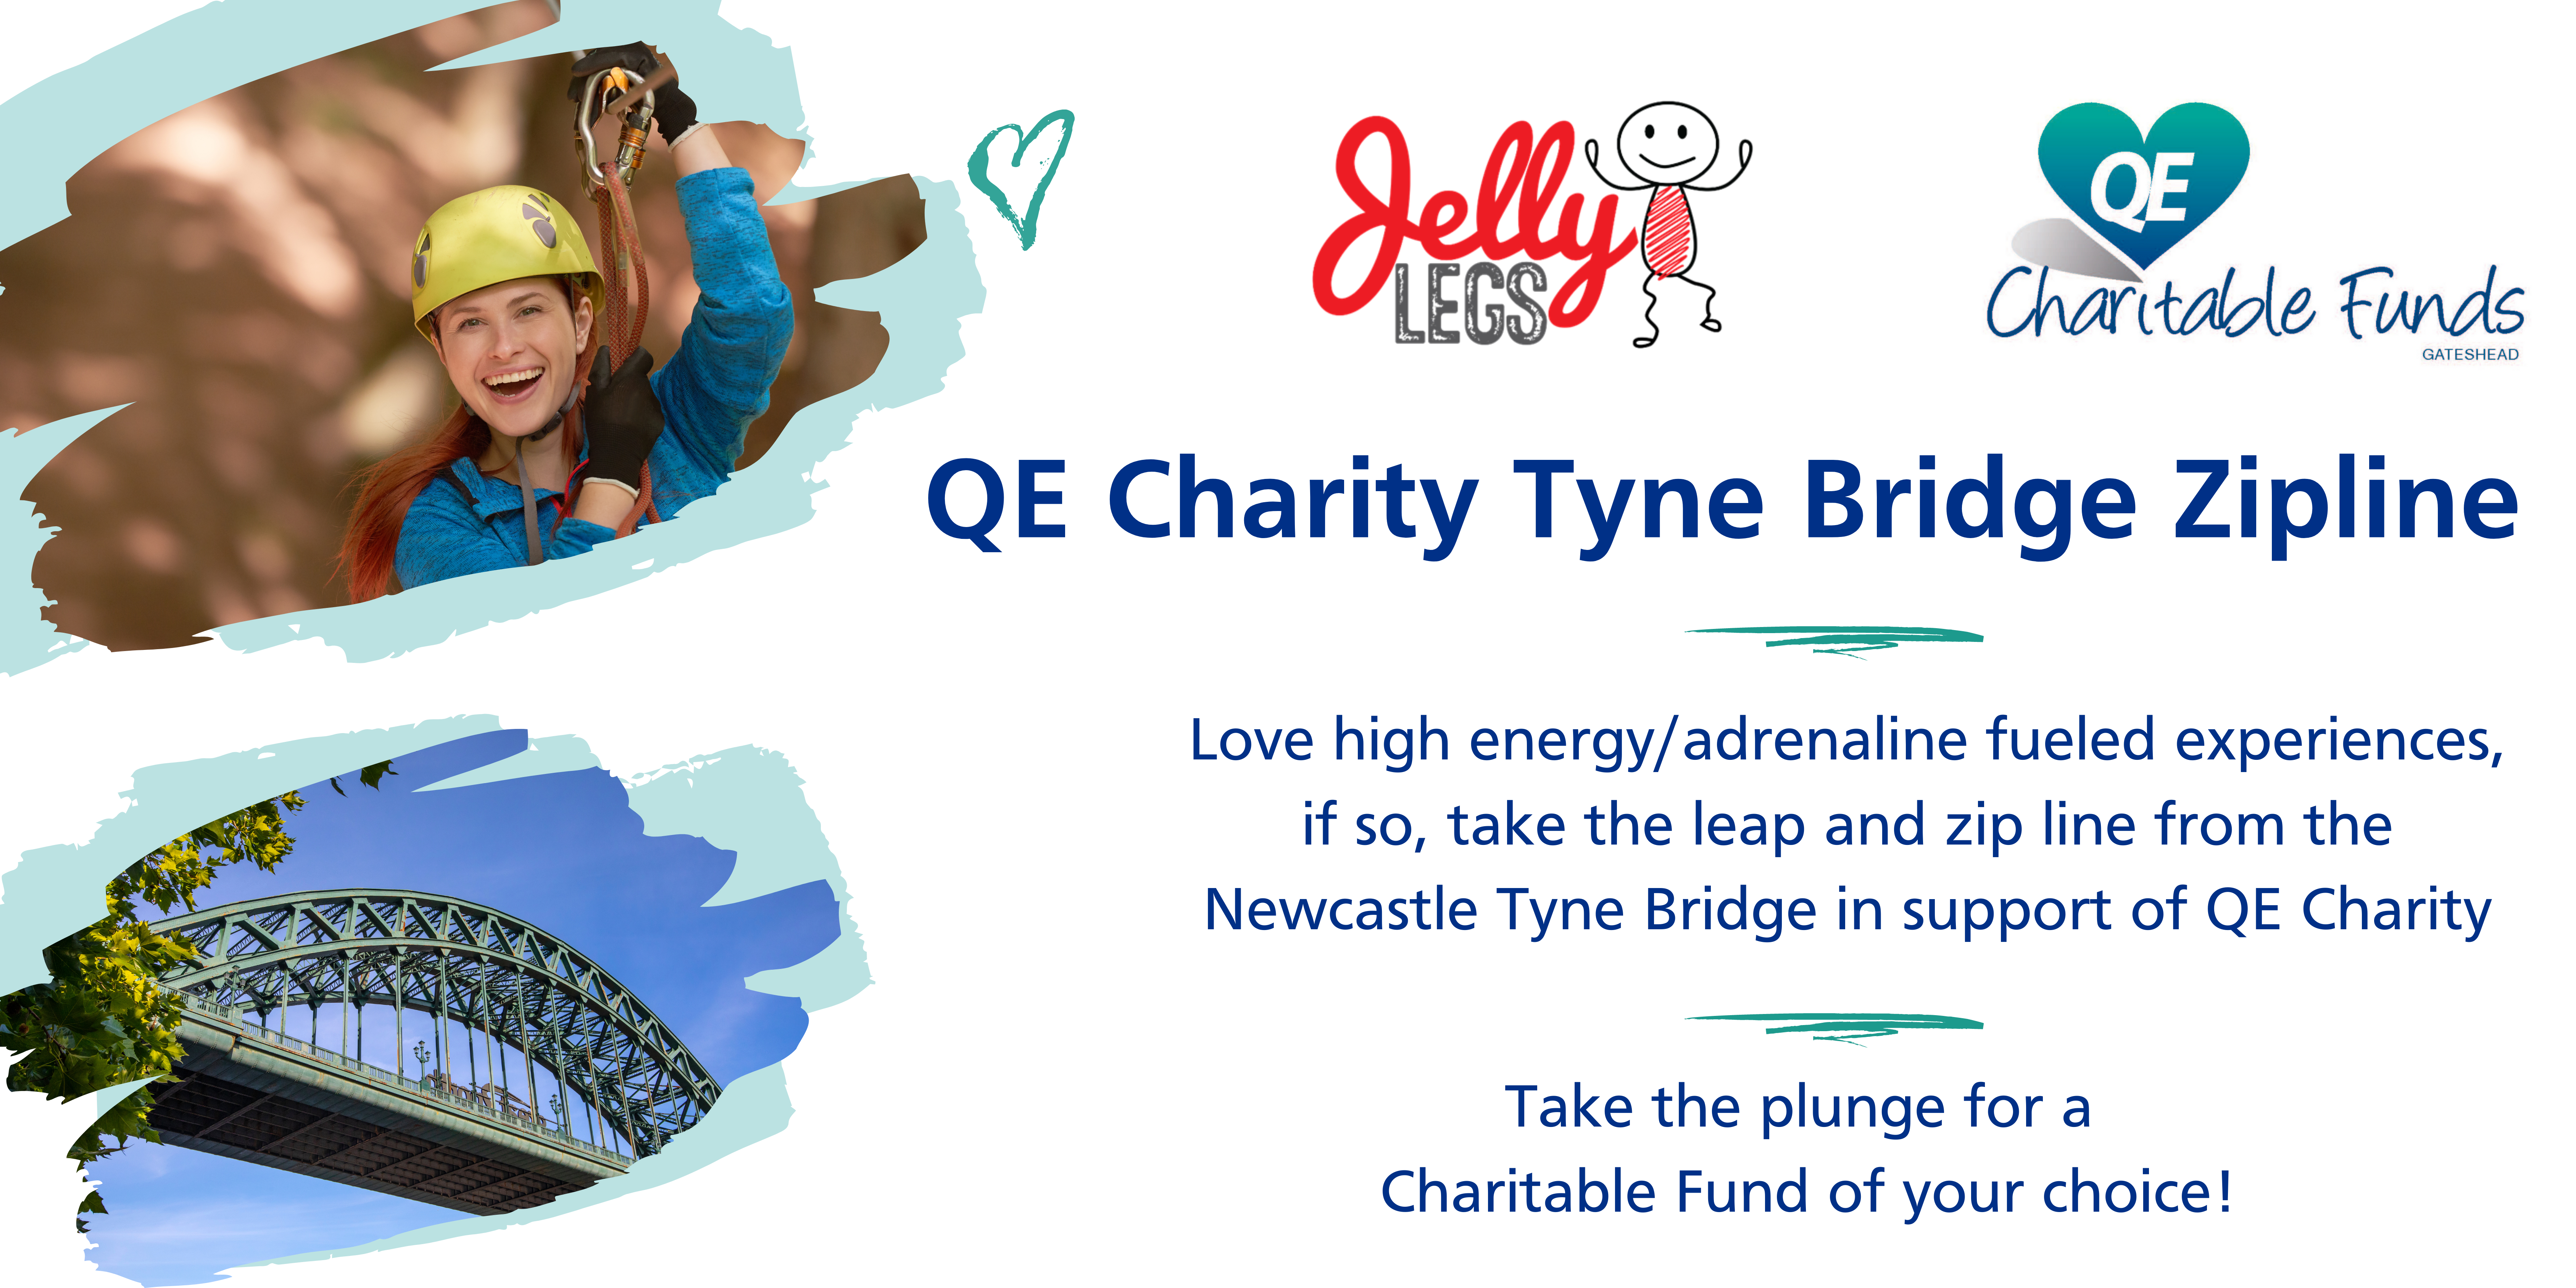 Graphic to advertise Charity Zip Line events